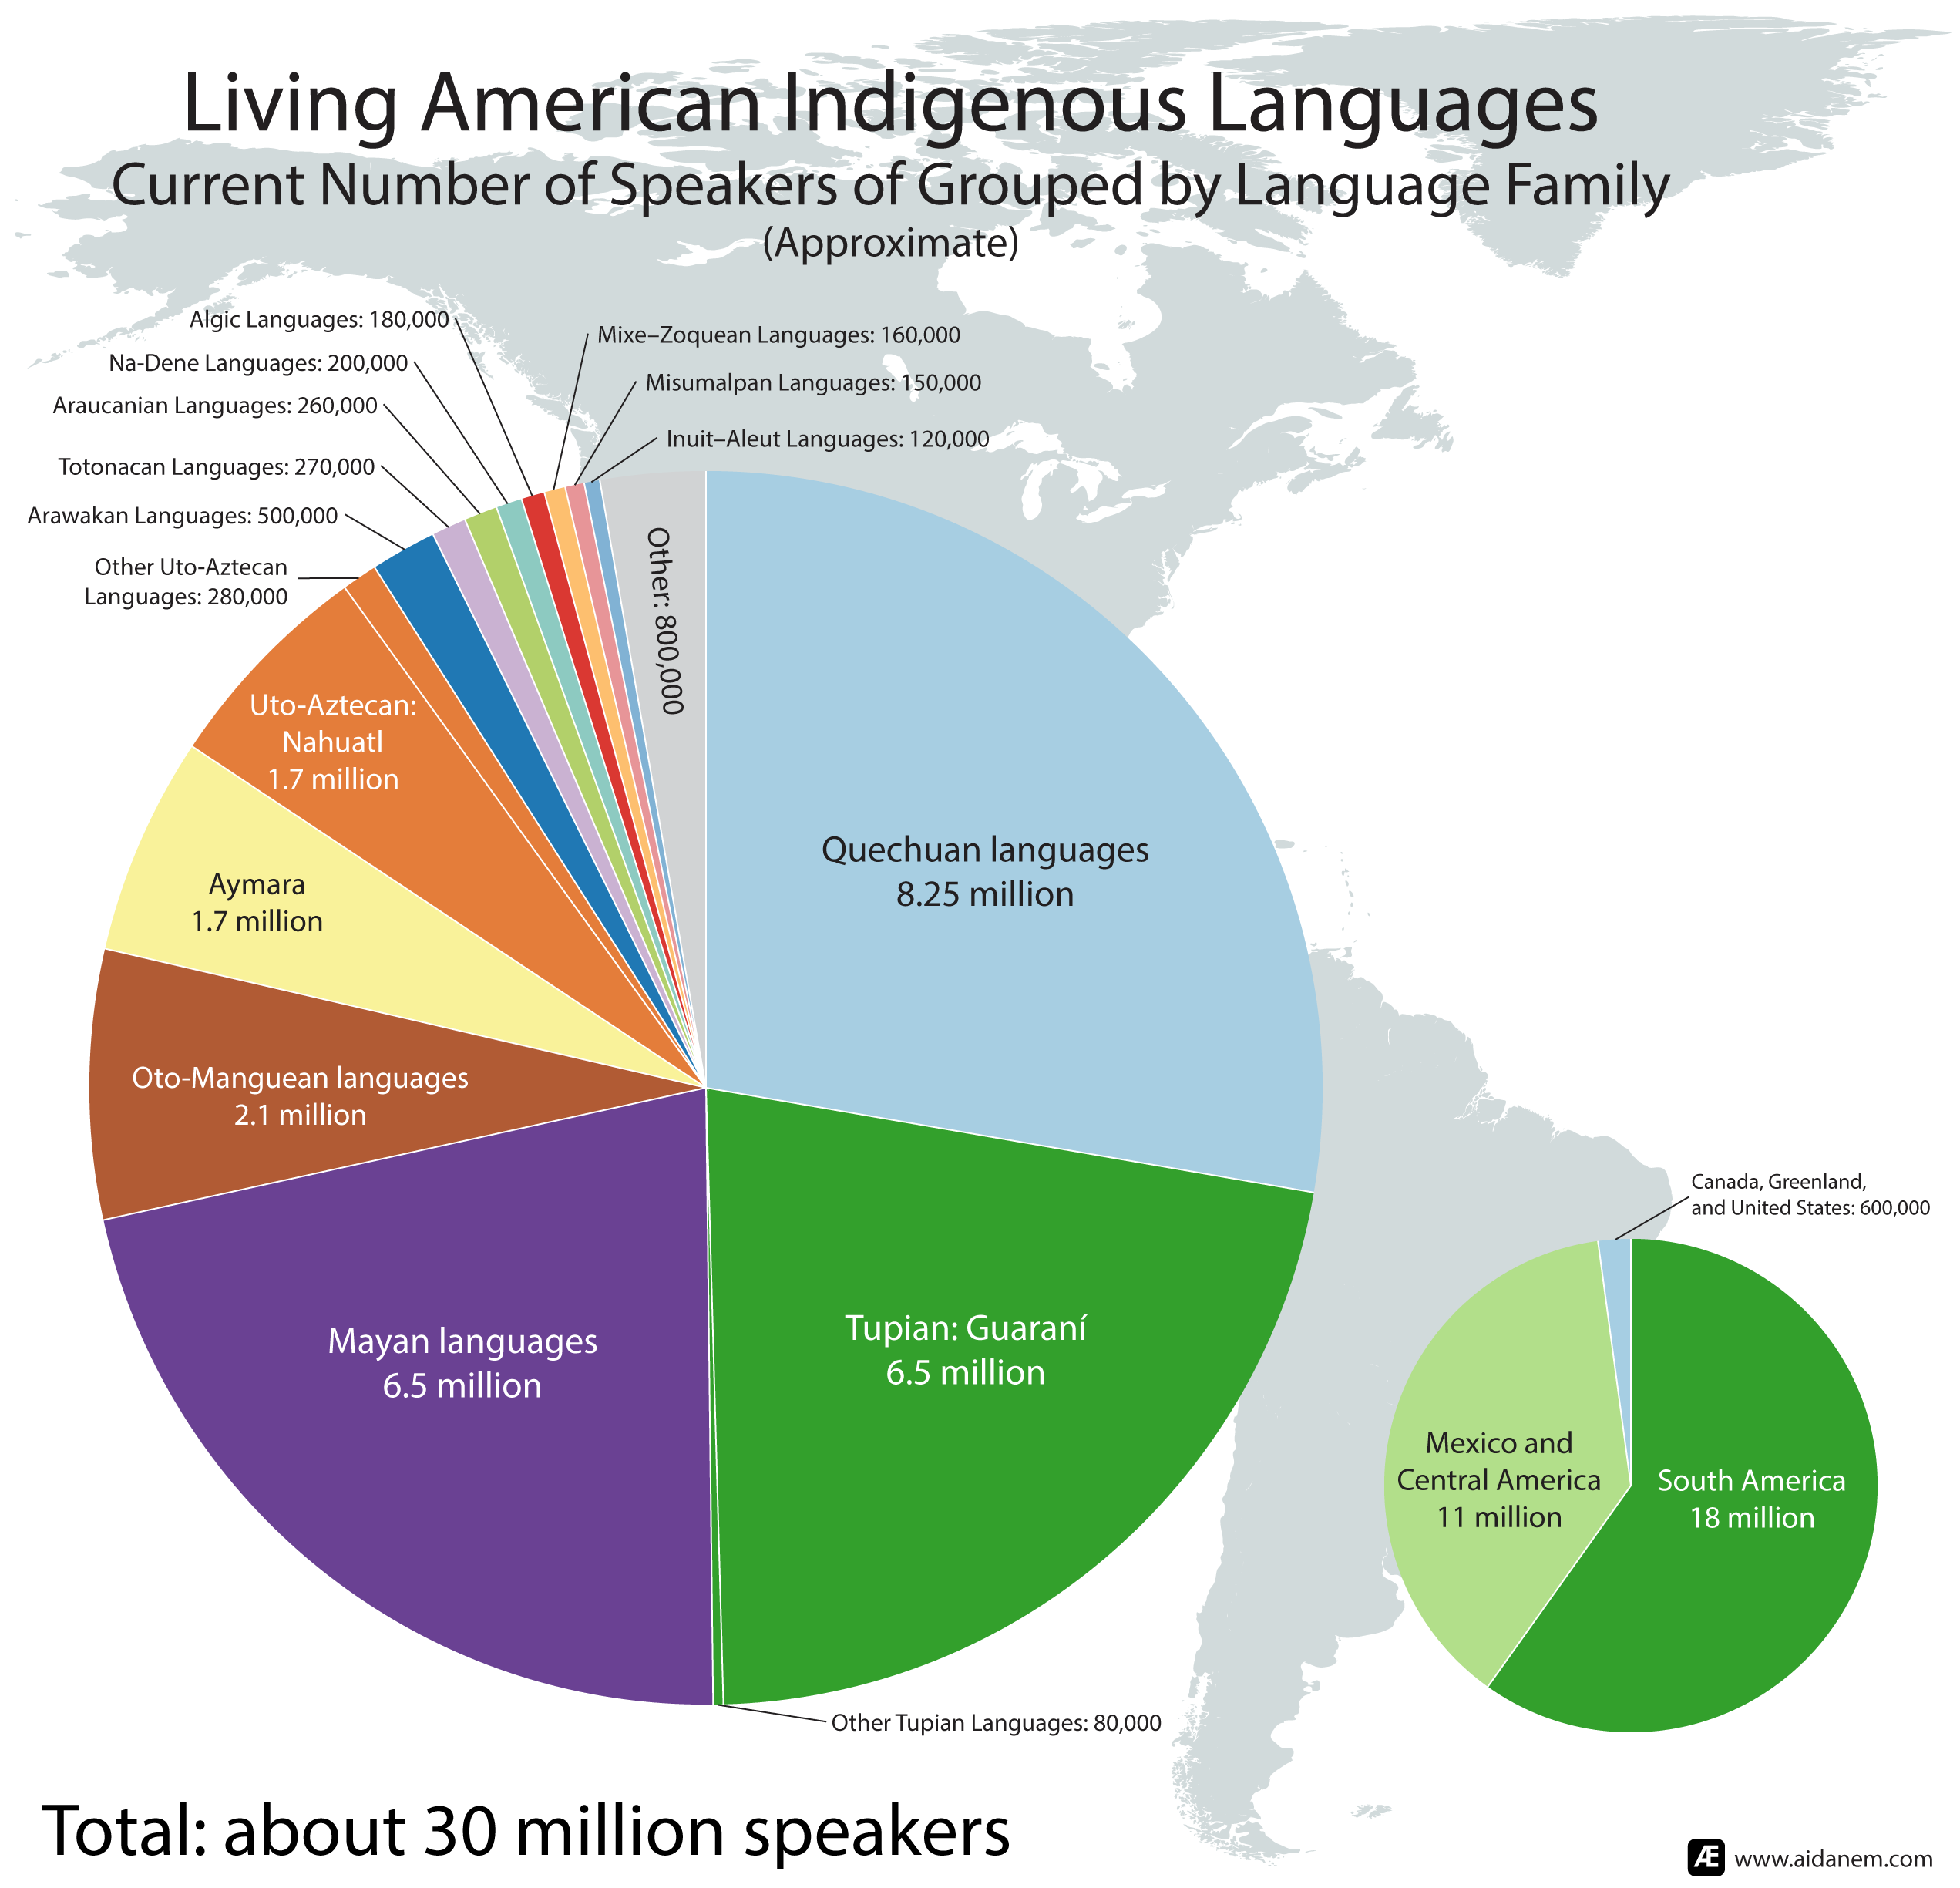 Pie graphs showing the breakdown of the 30 million speakers of American Indigenous languages by language family and geographical region.